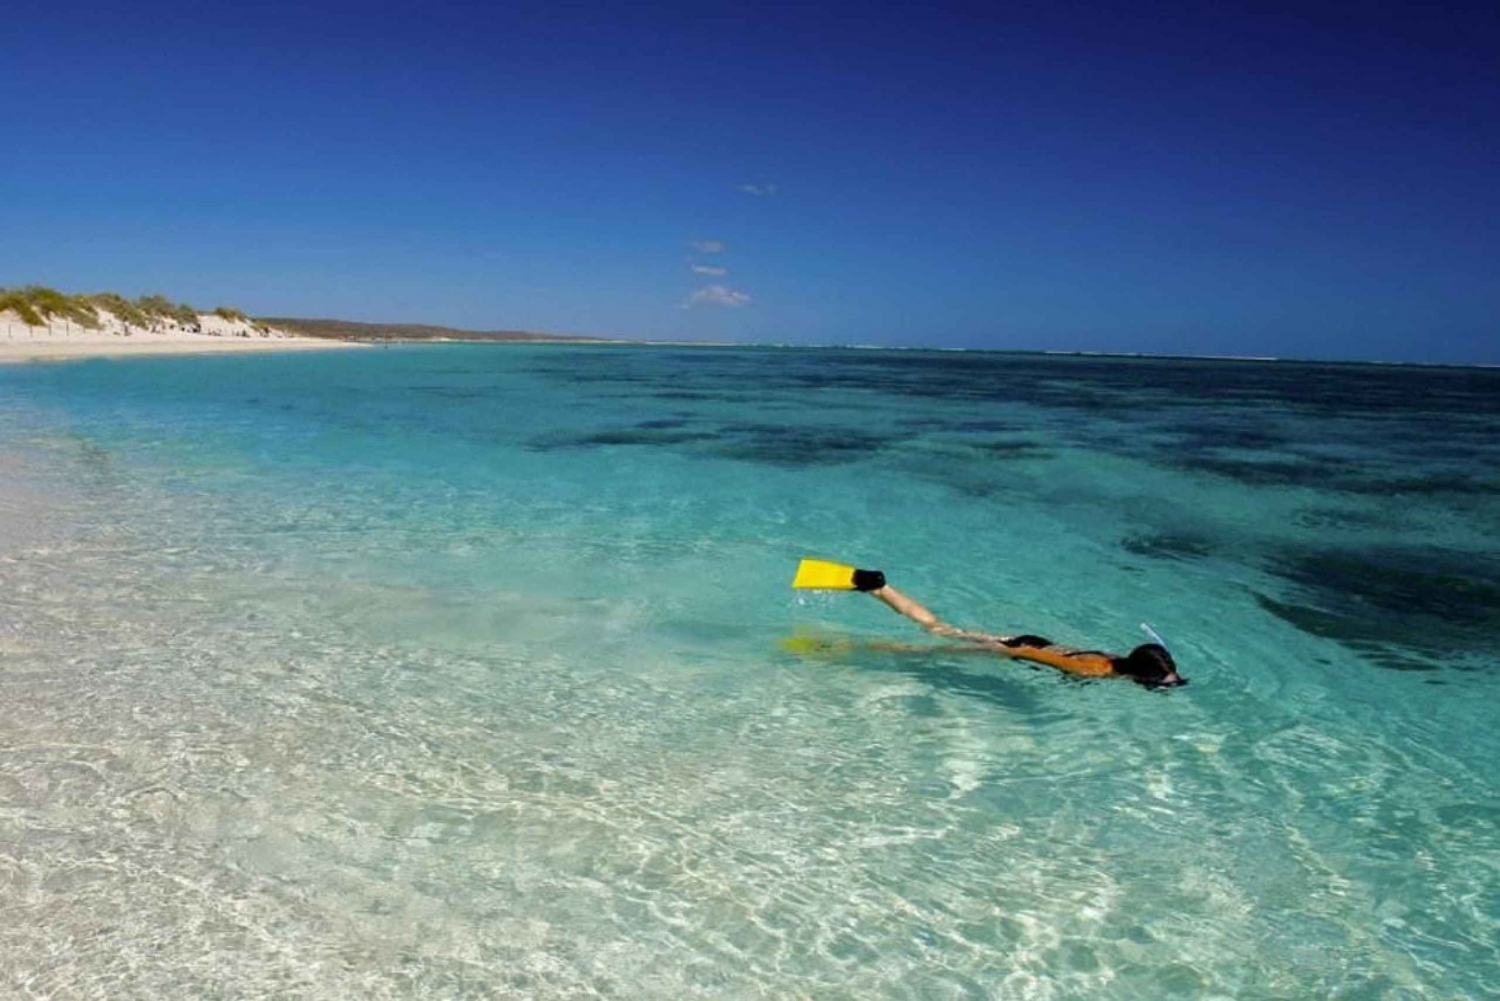 From Perth: 6-Day Whale Shark Snorkel and Ningaloo Reef Tour